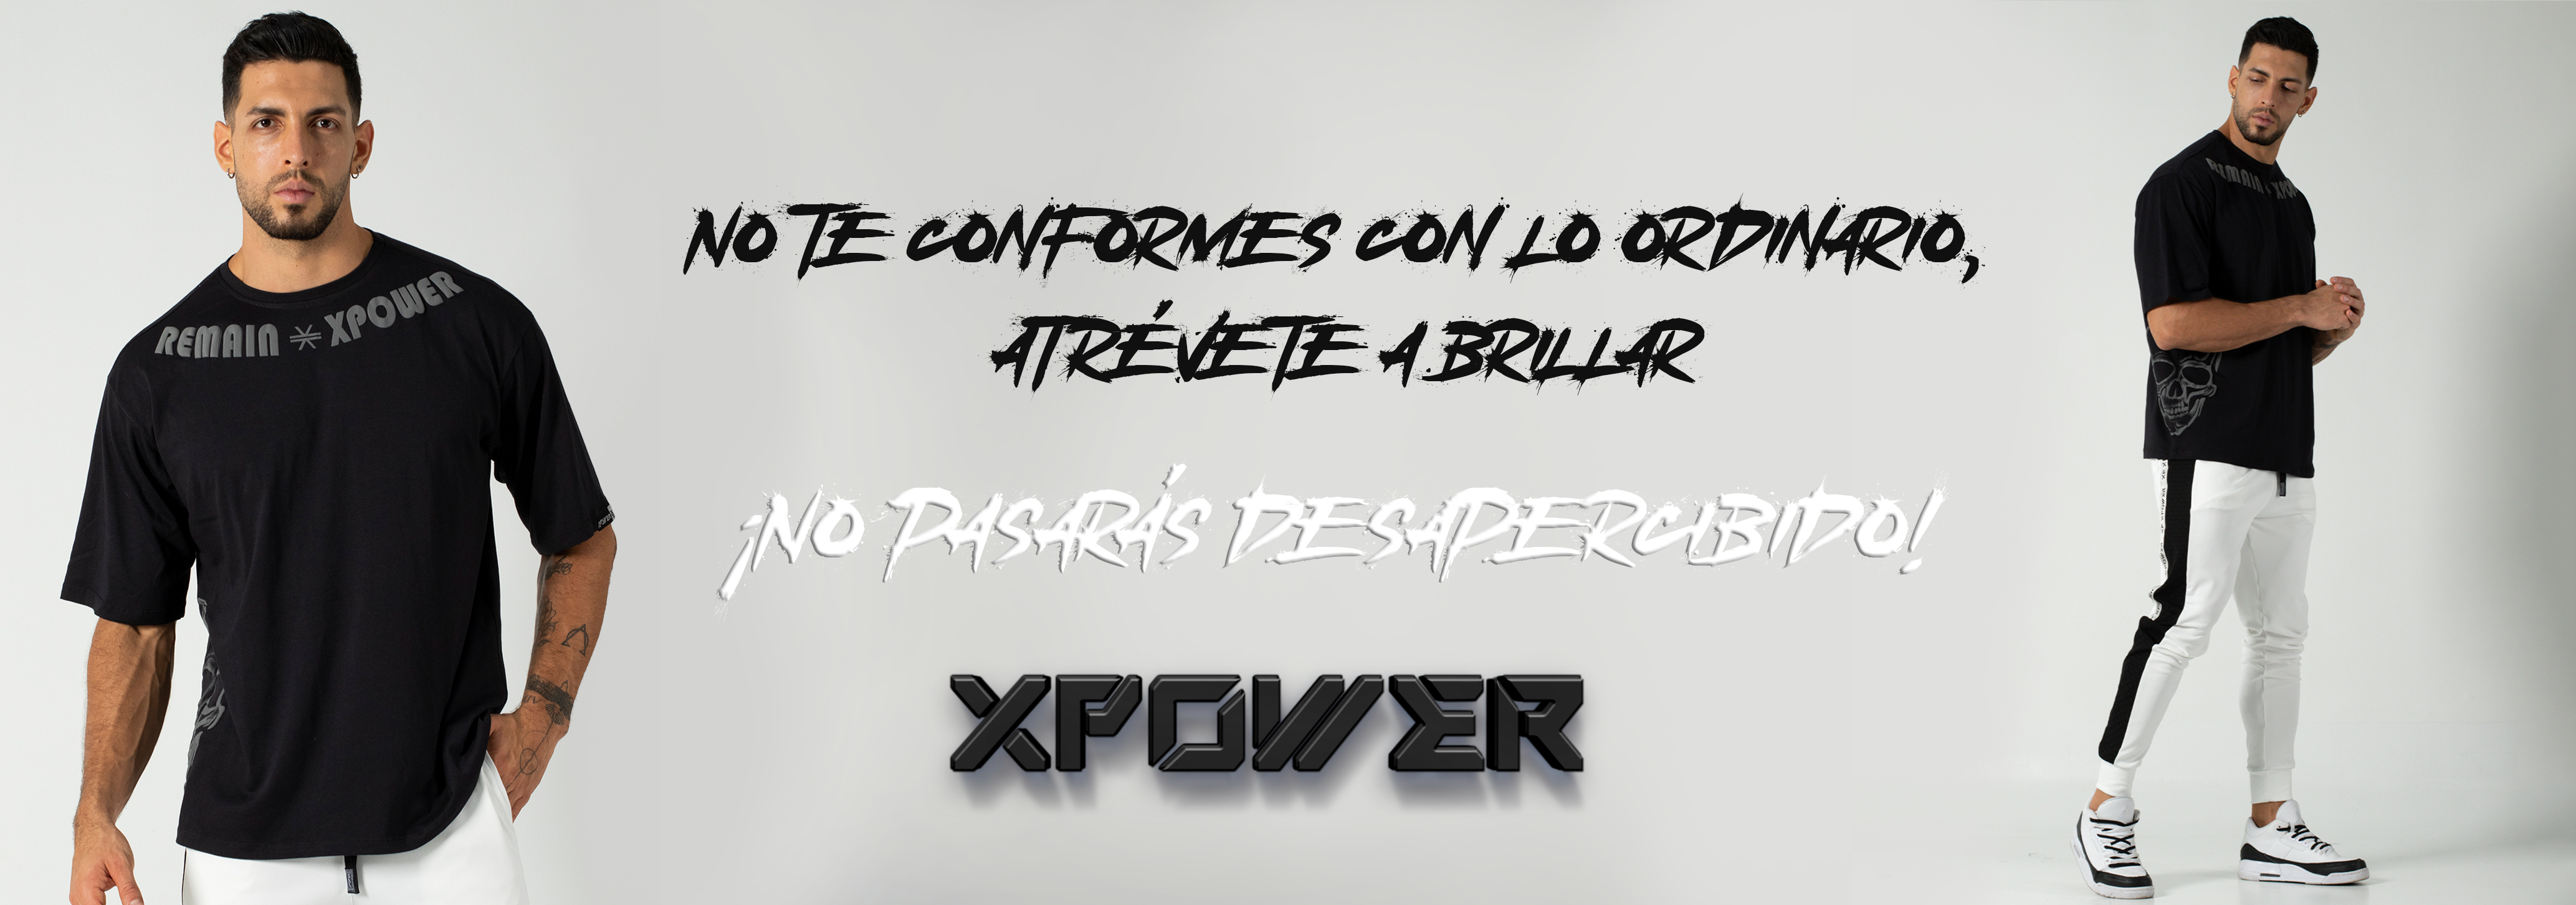 xpower colombia